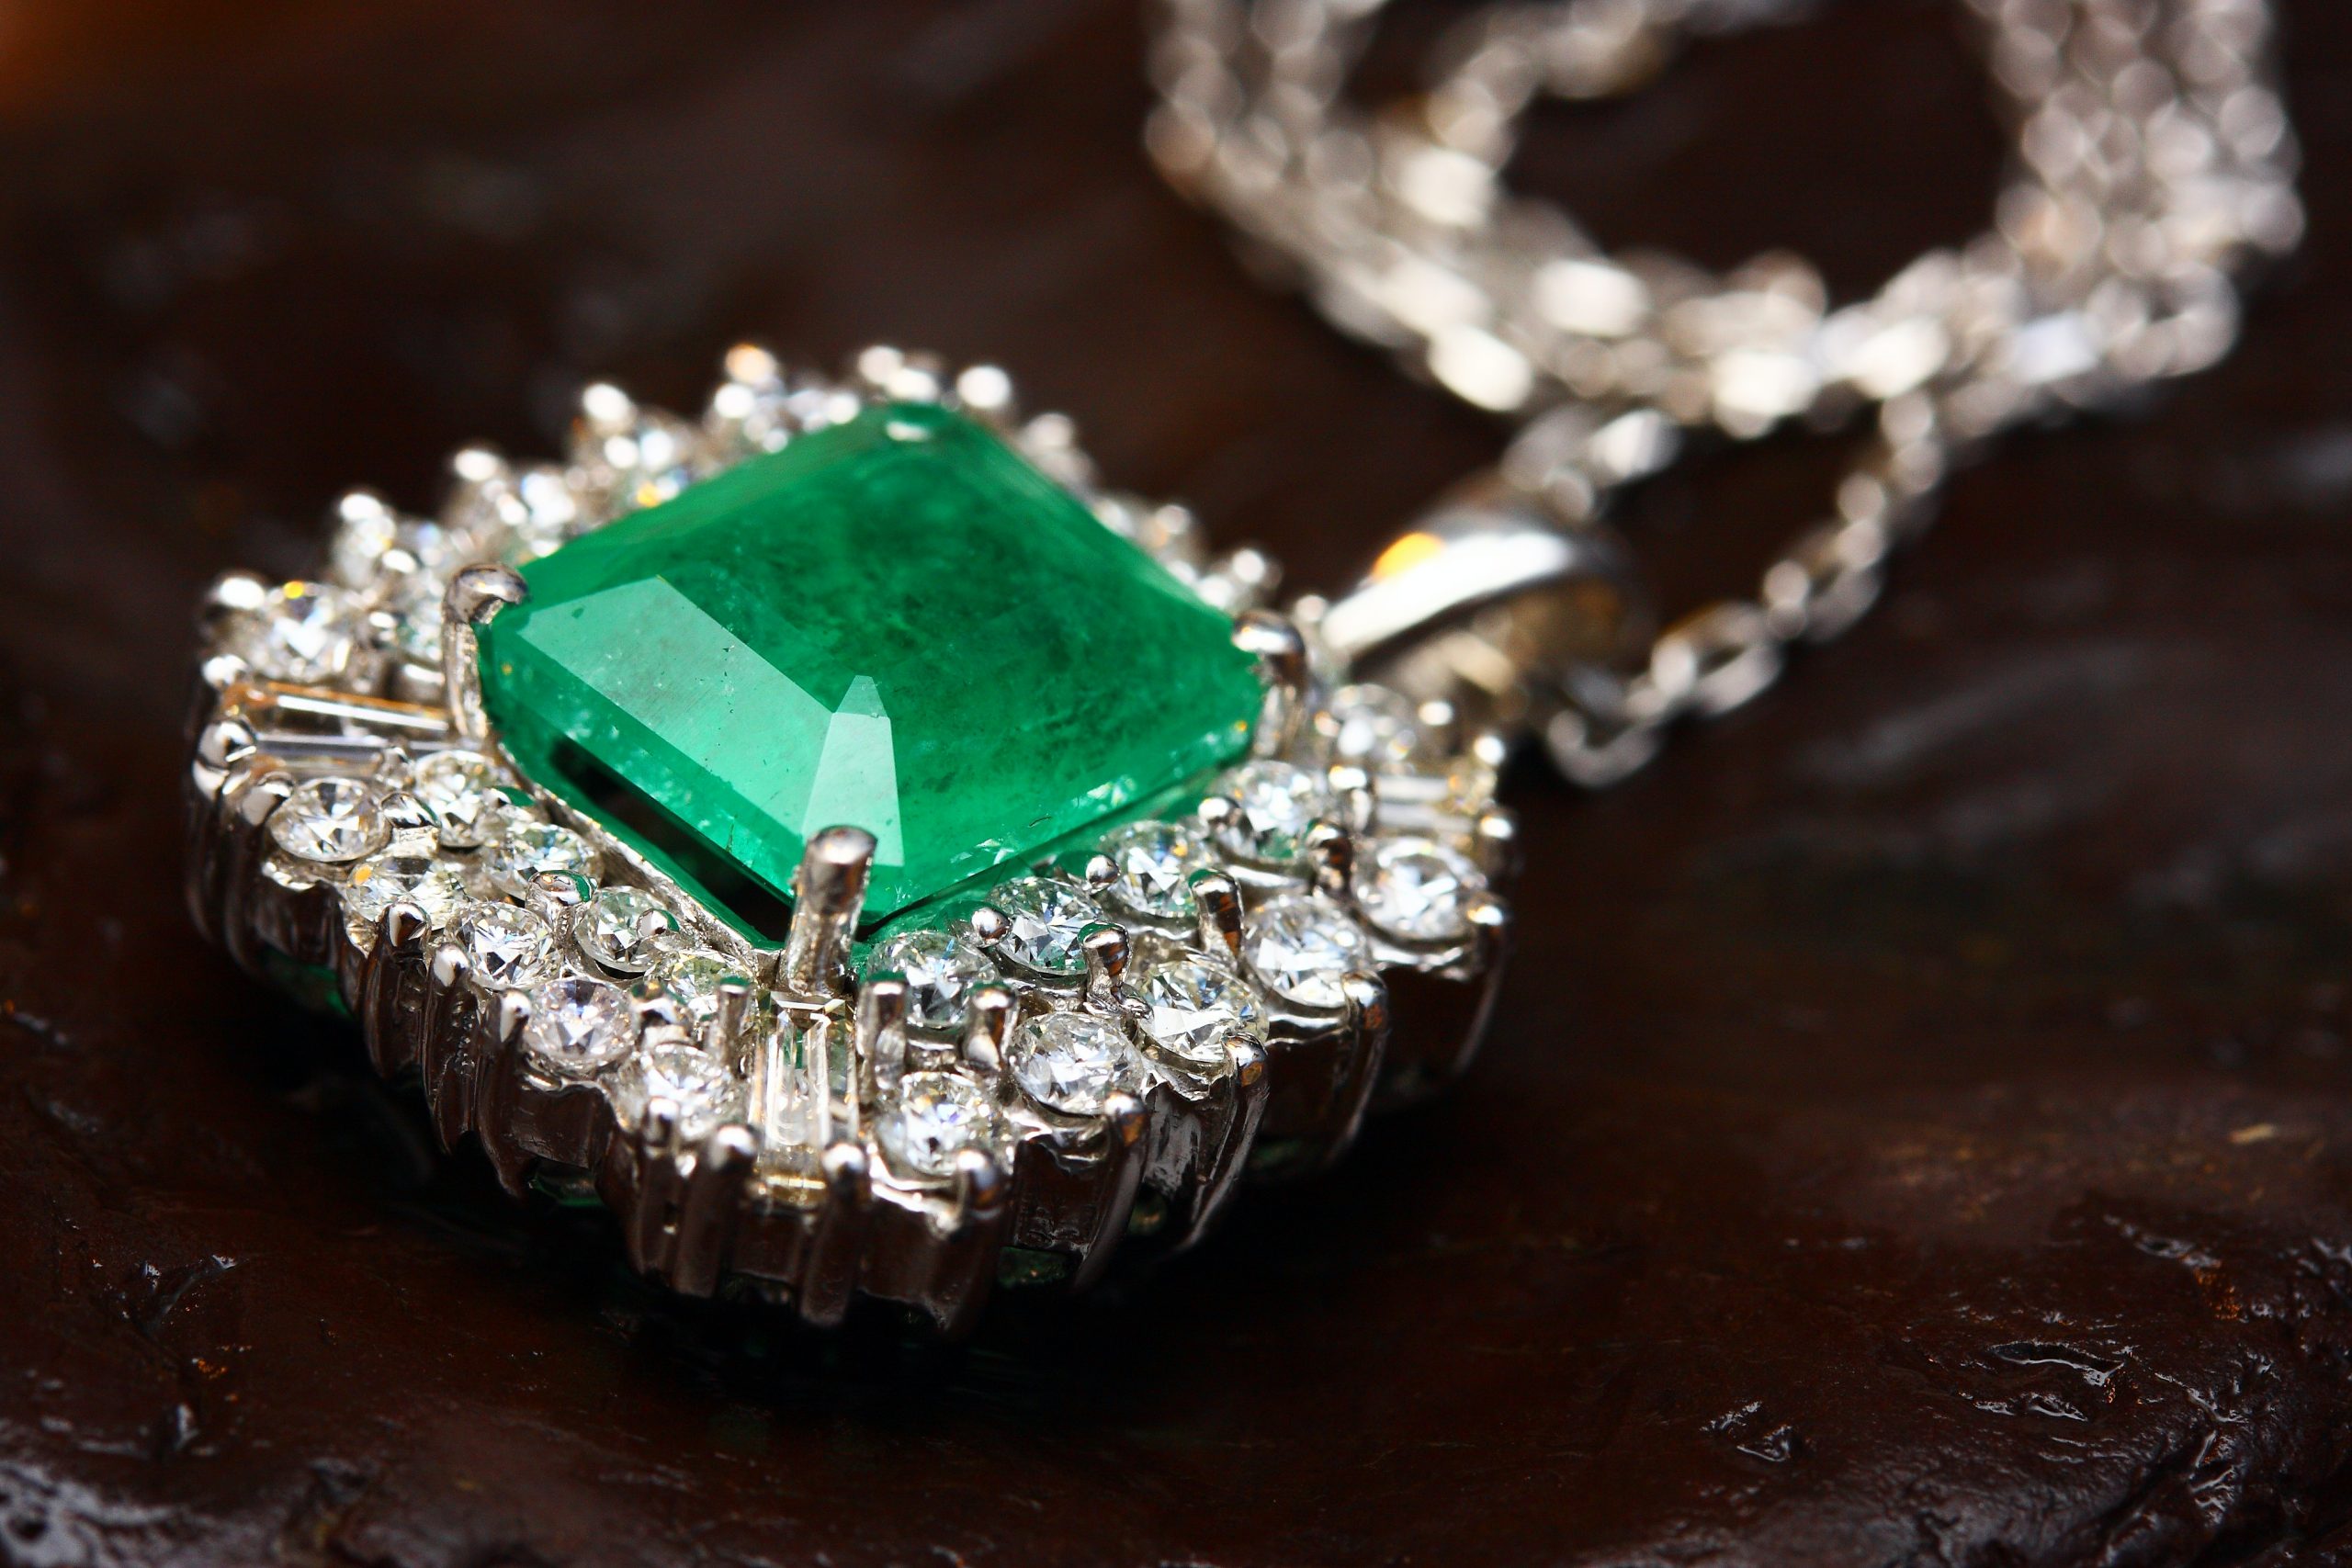 Antique white gold pendant centered with an emerald surrounded by a double diamond halo.